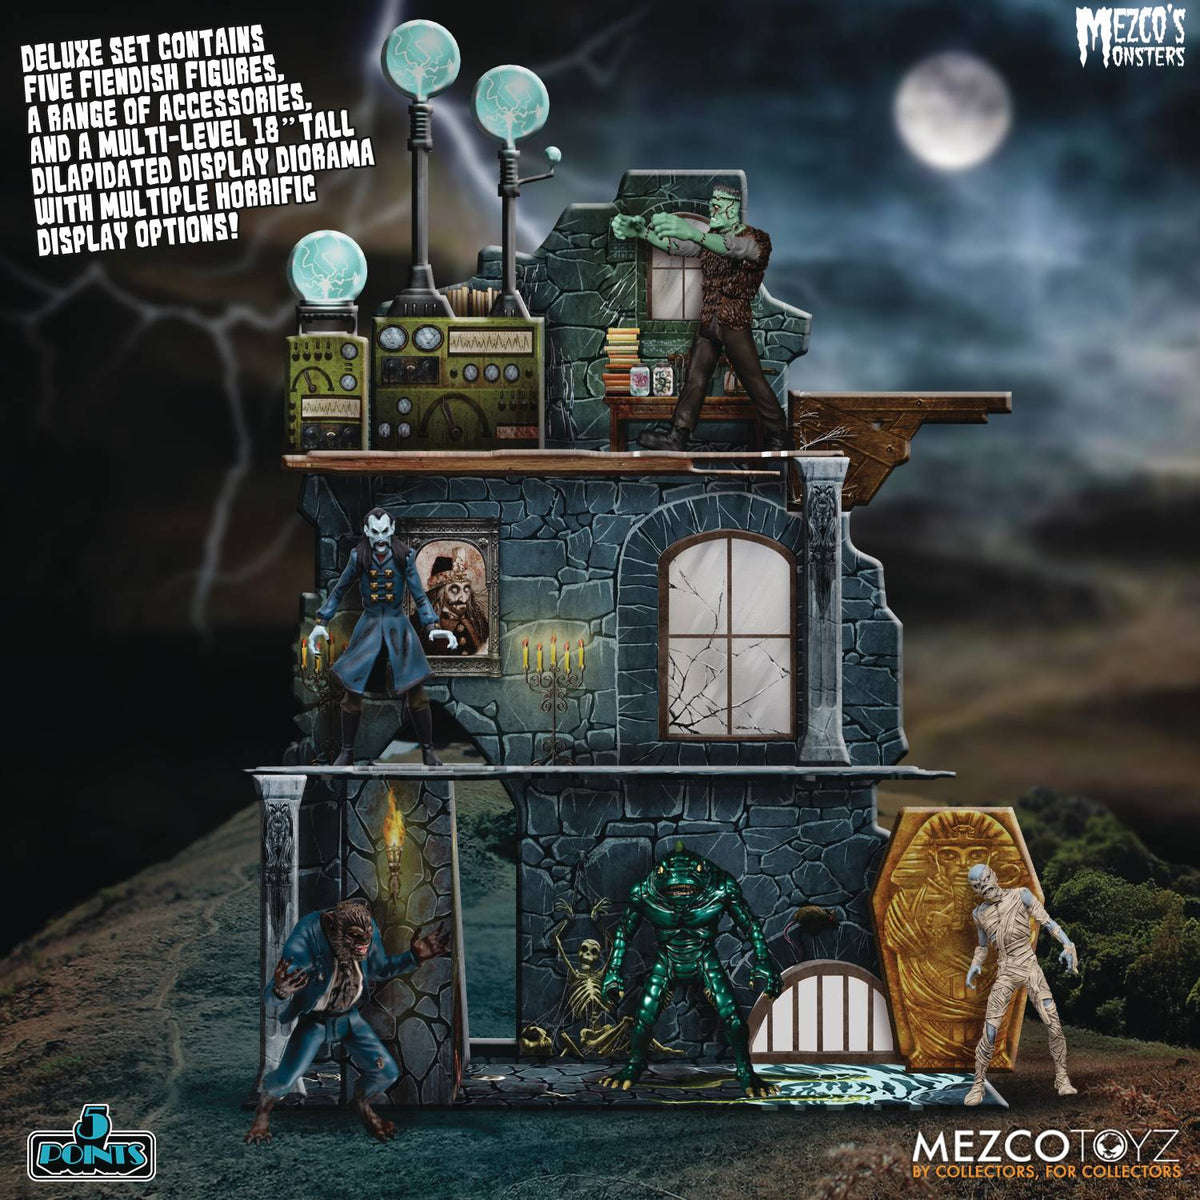 5 Points Mexcos Monsters Tower of Fear Deluxe Box Set